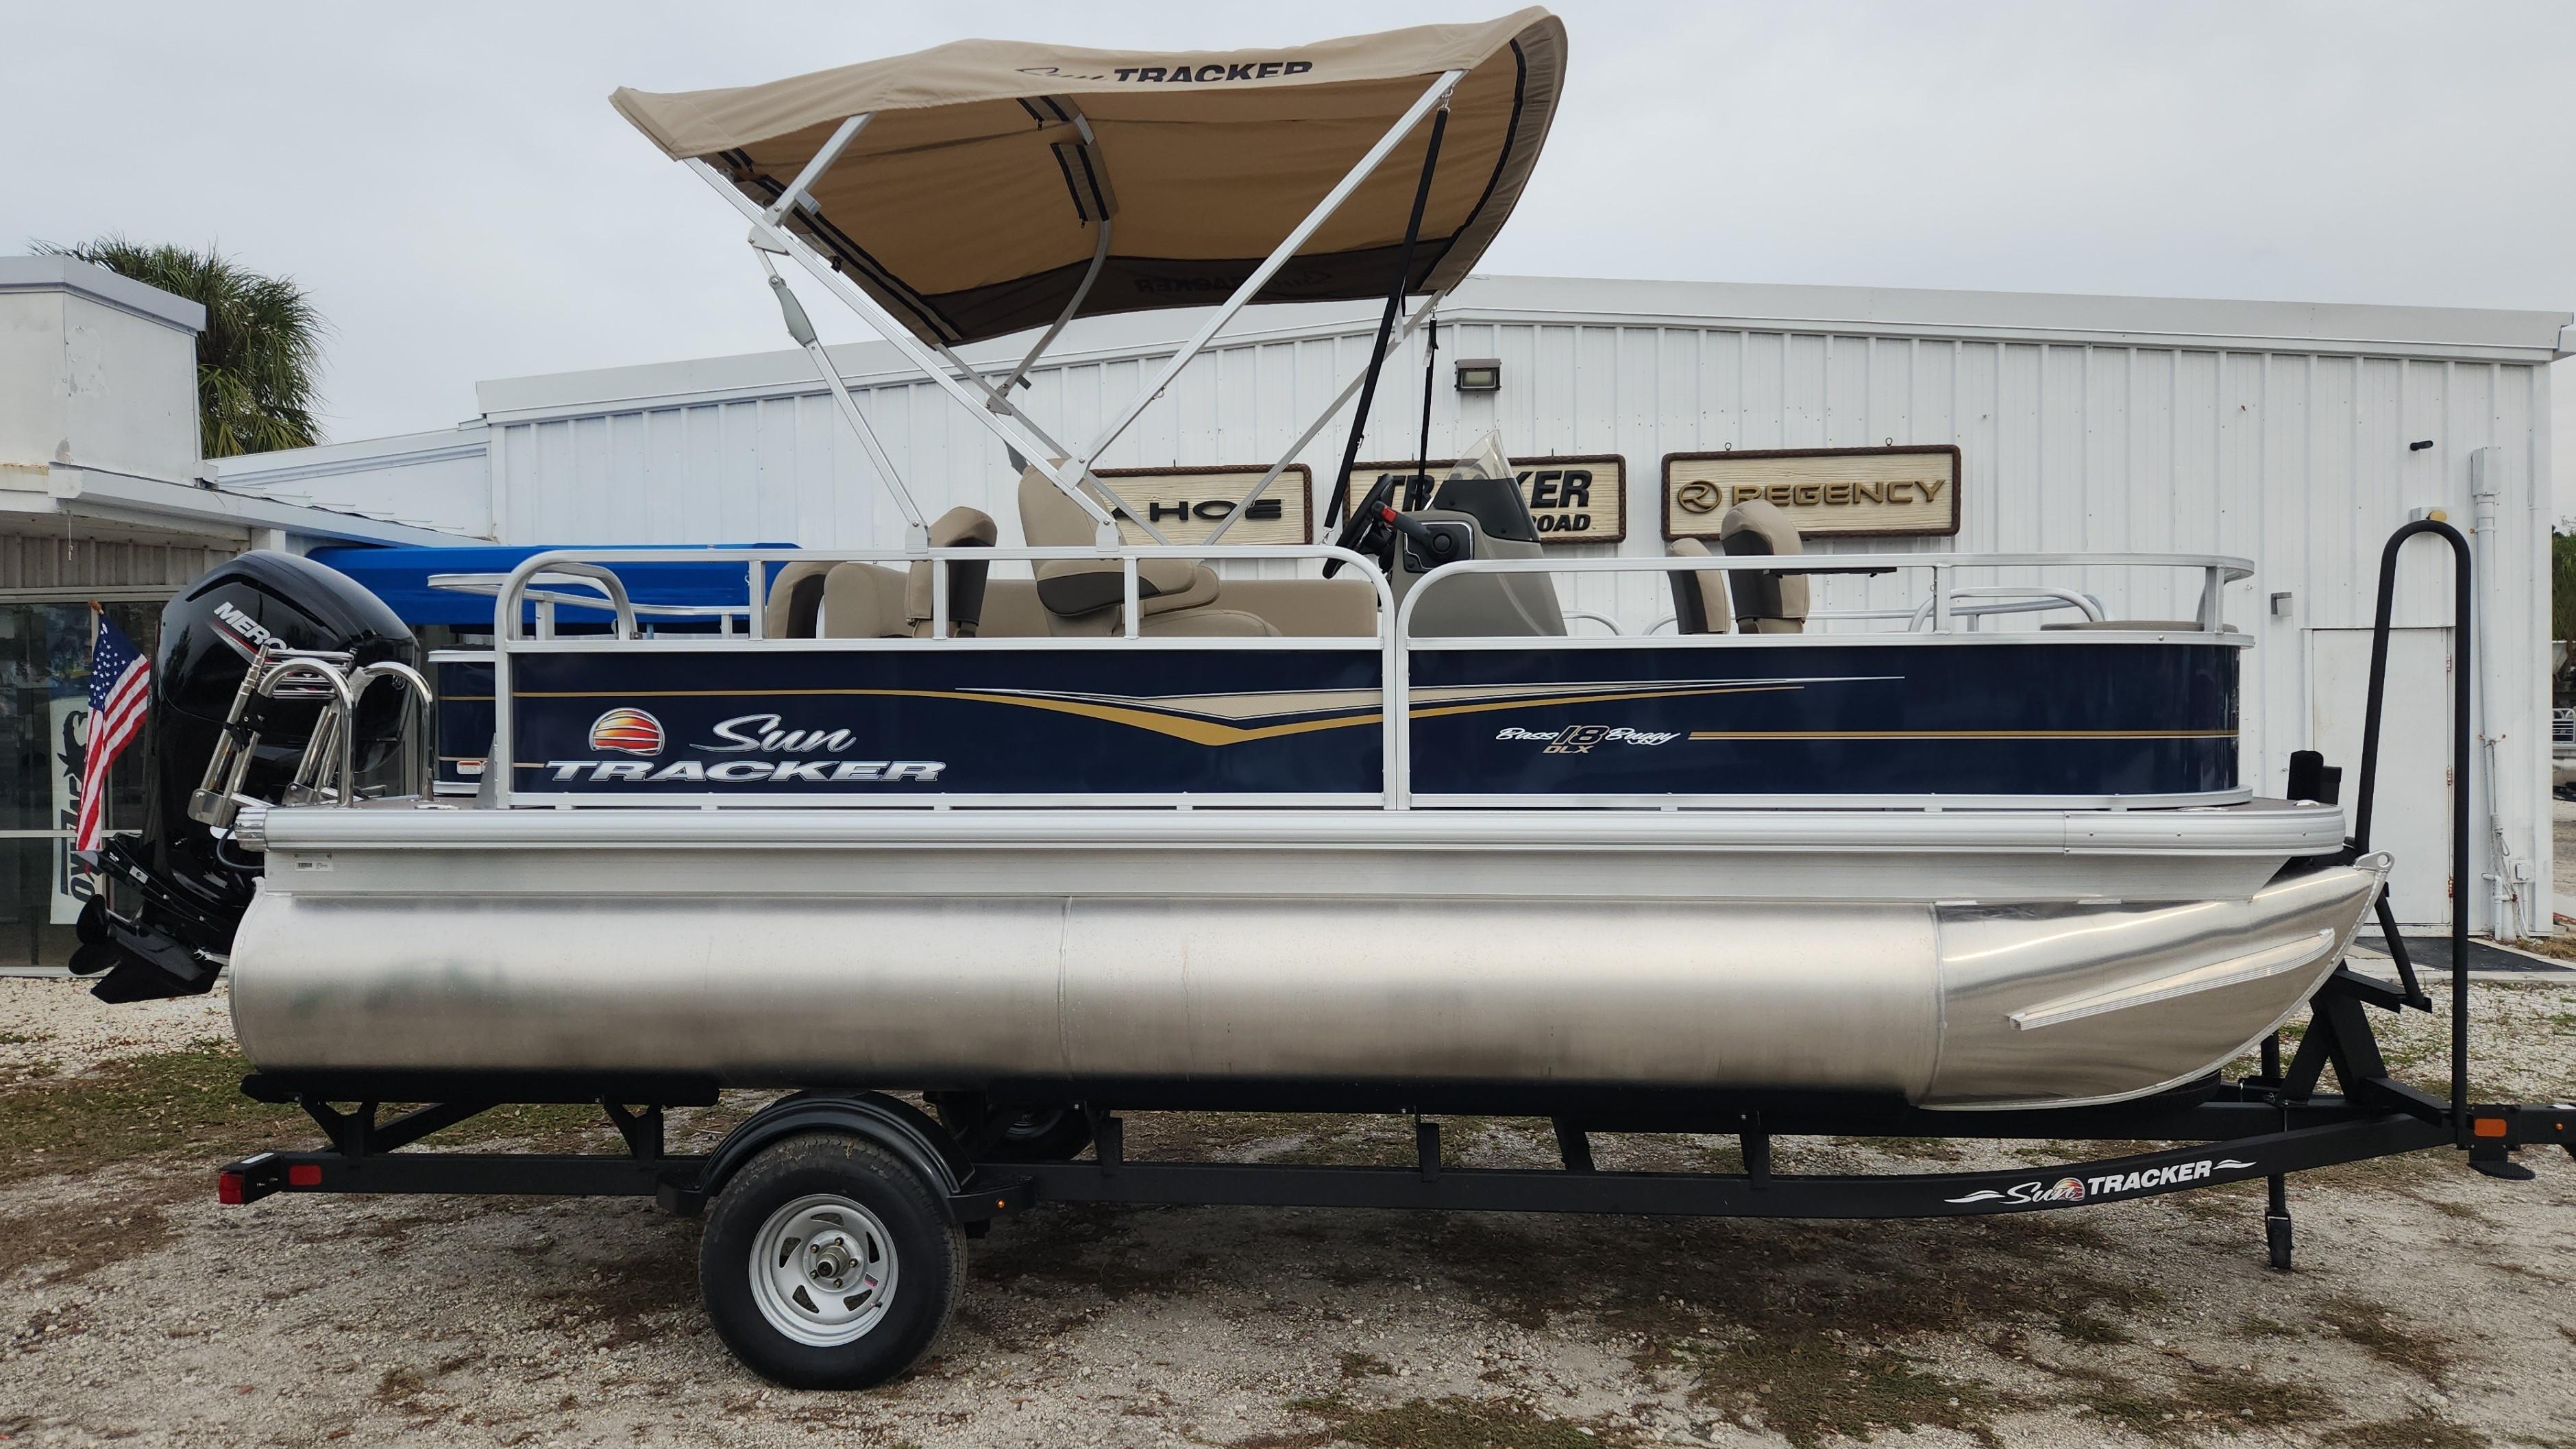 Boats for Sale at Tracker Boating Center